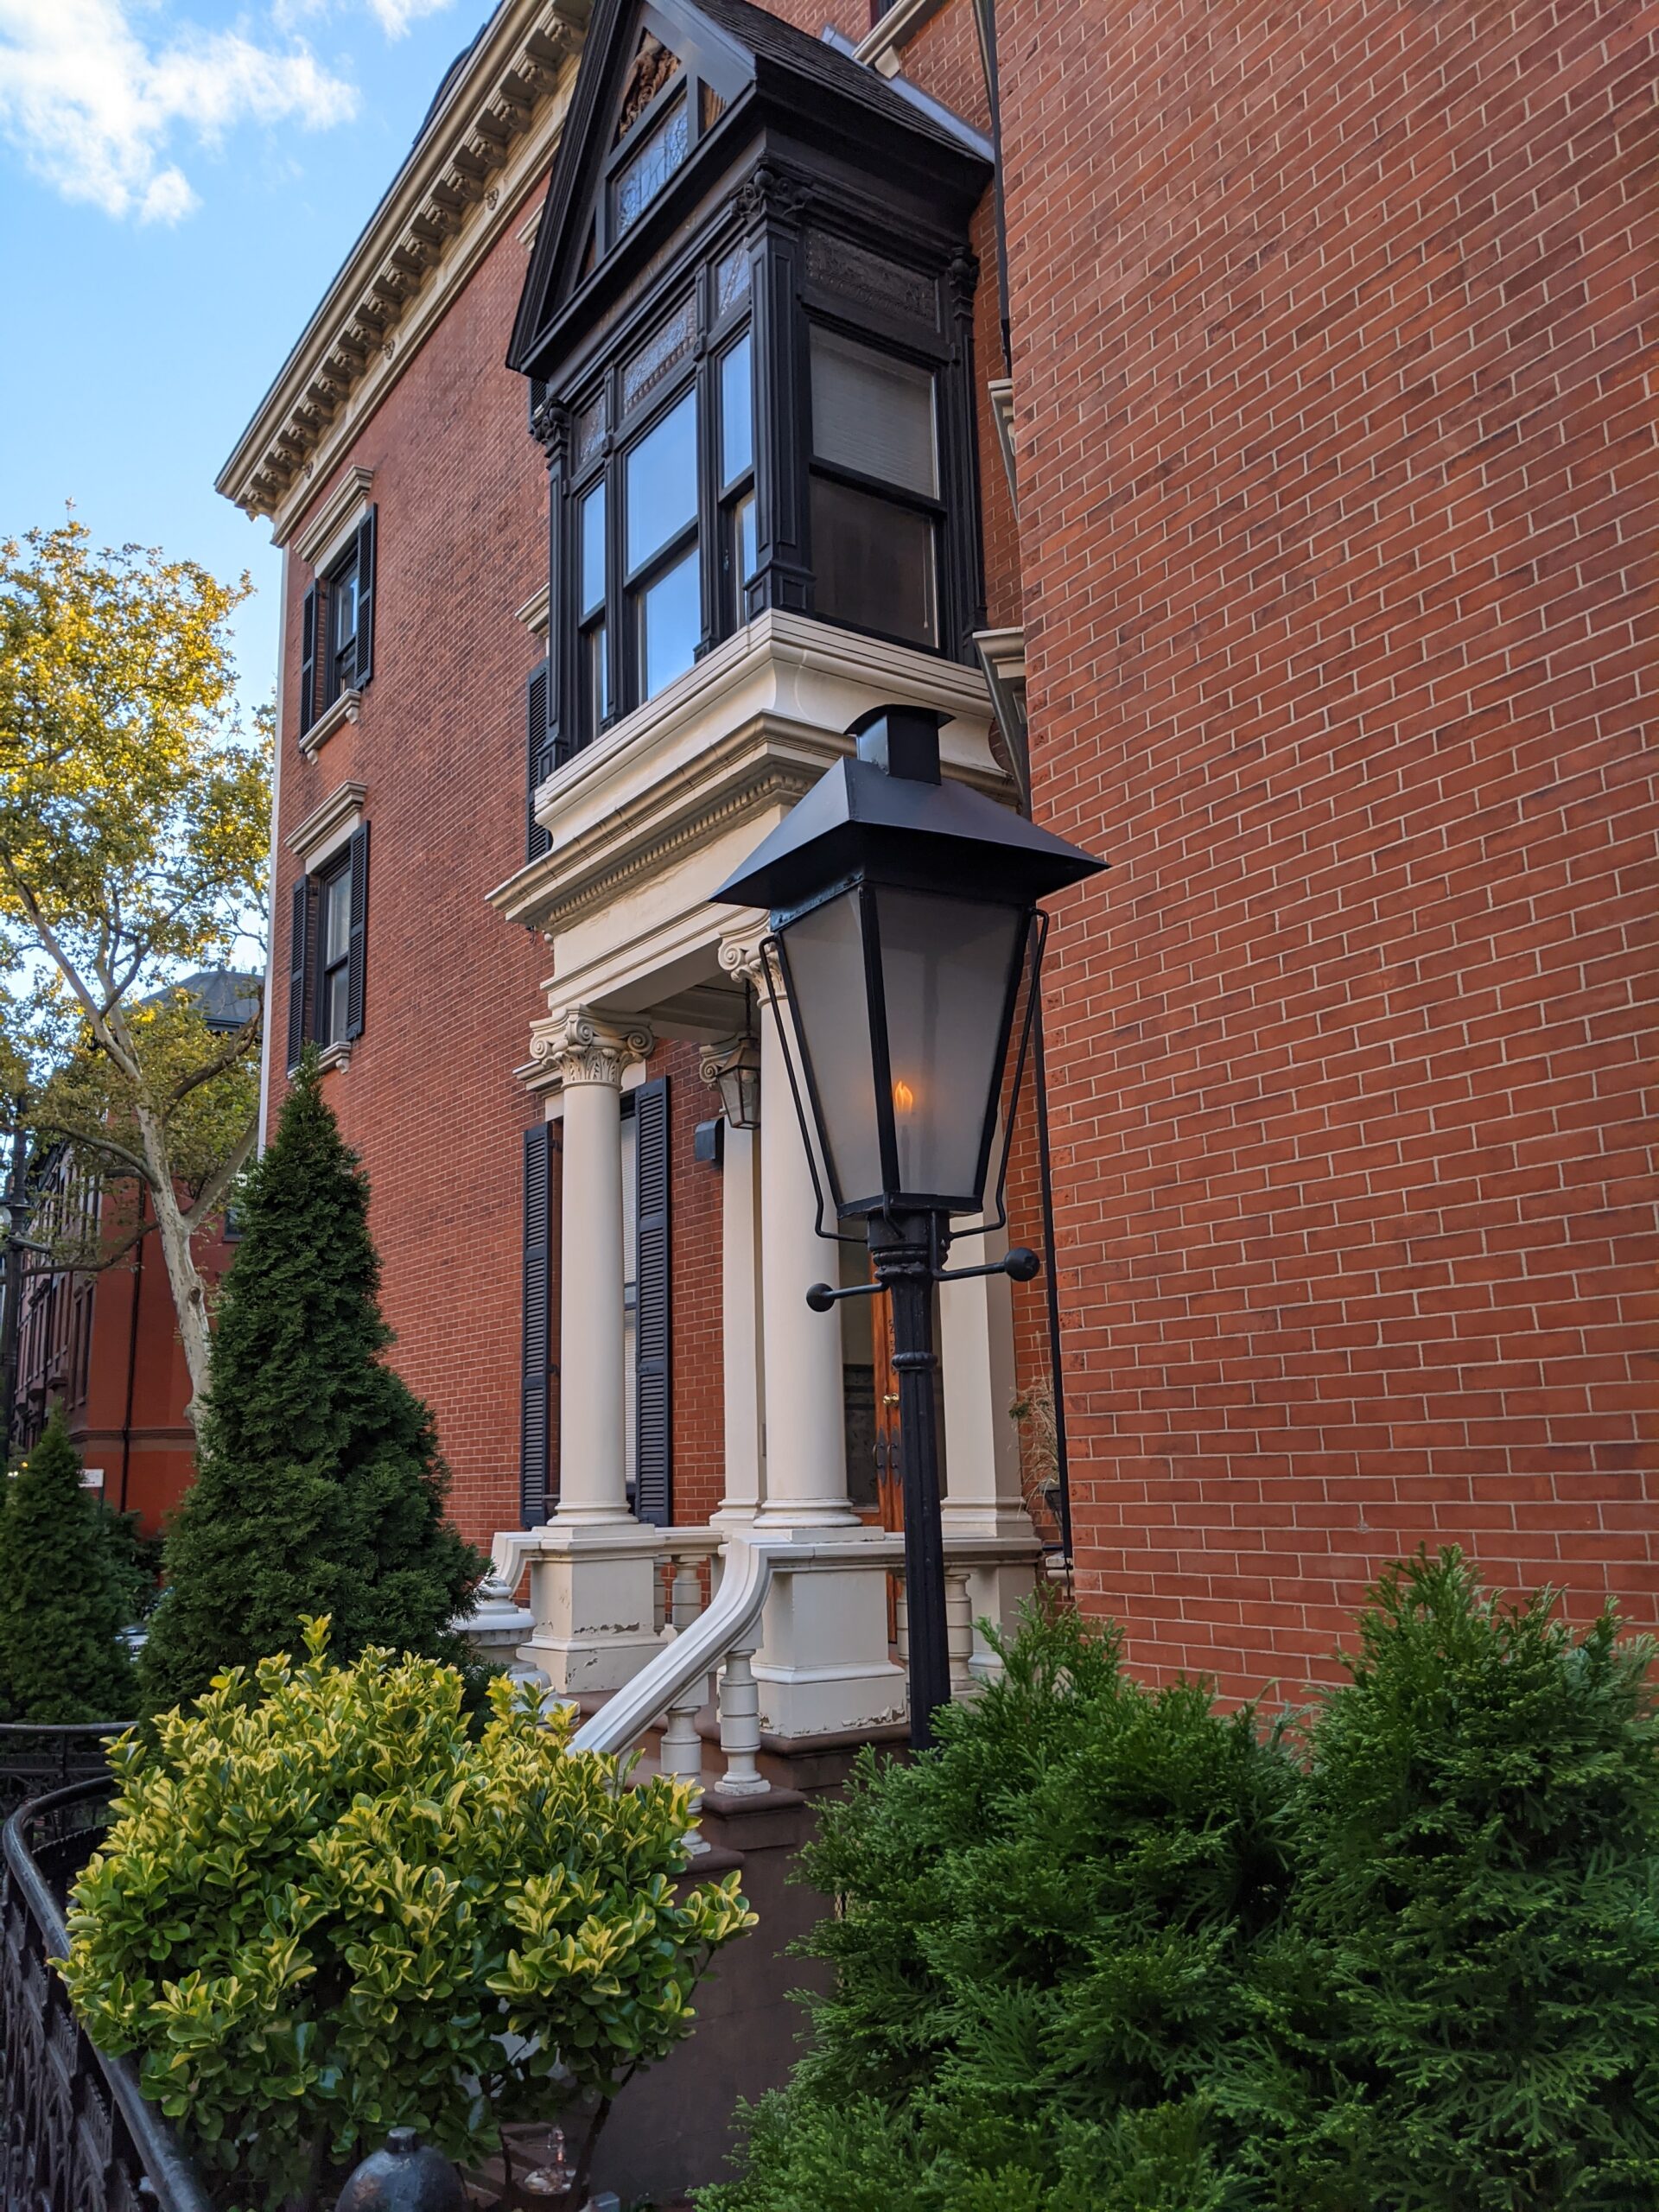 an old fashioned lamppost in front of a red brick building